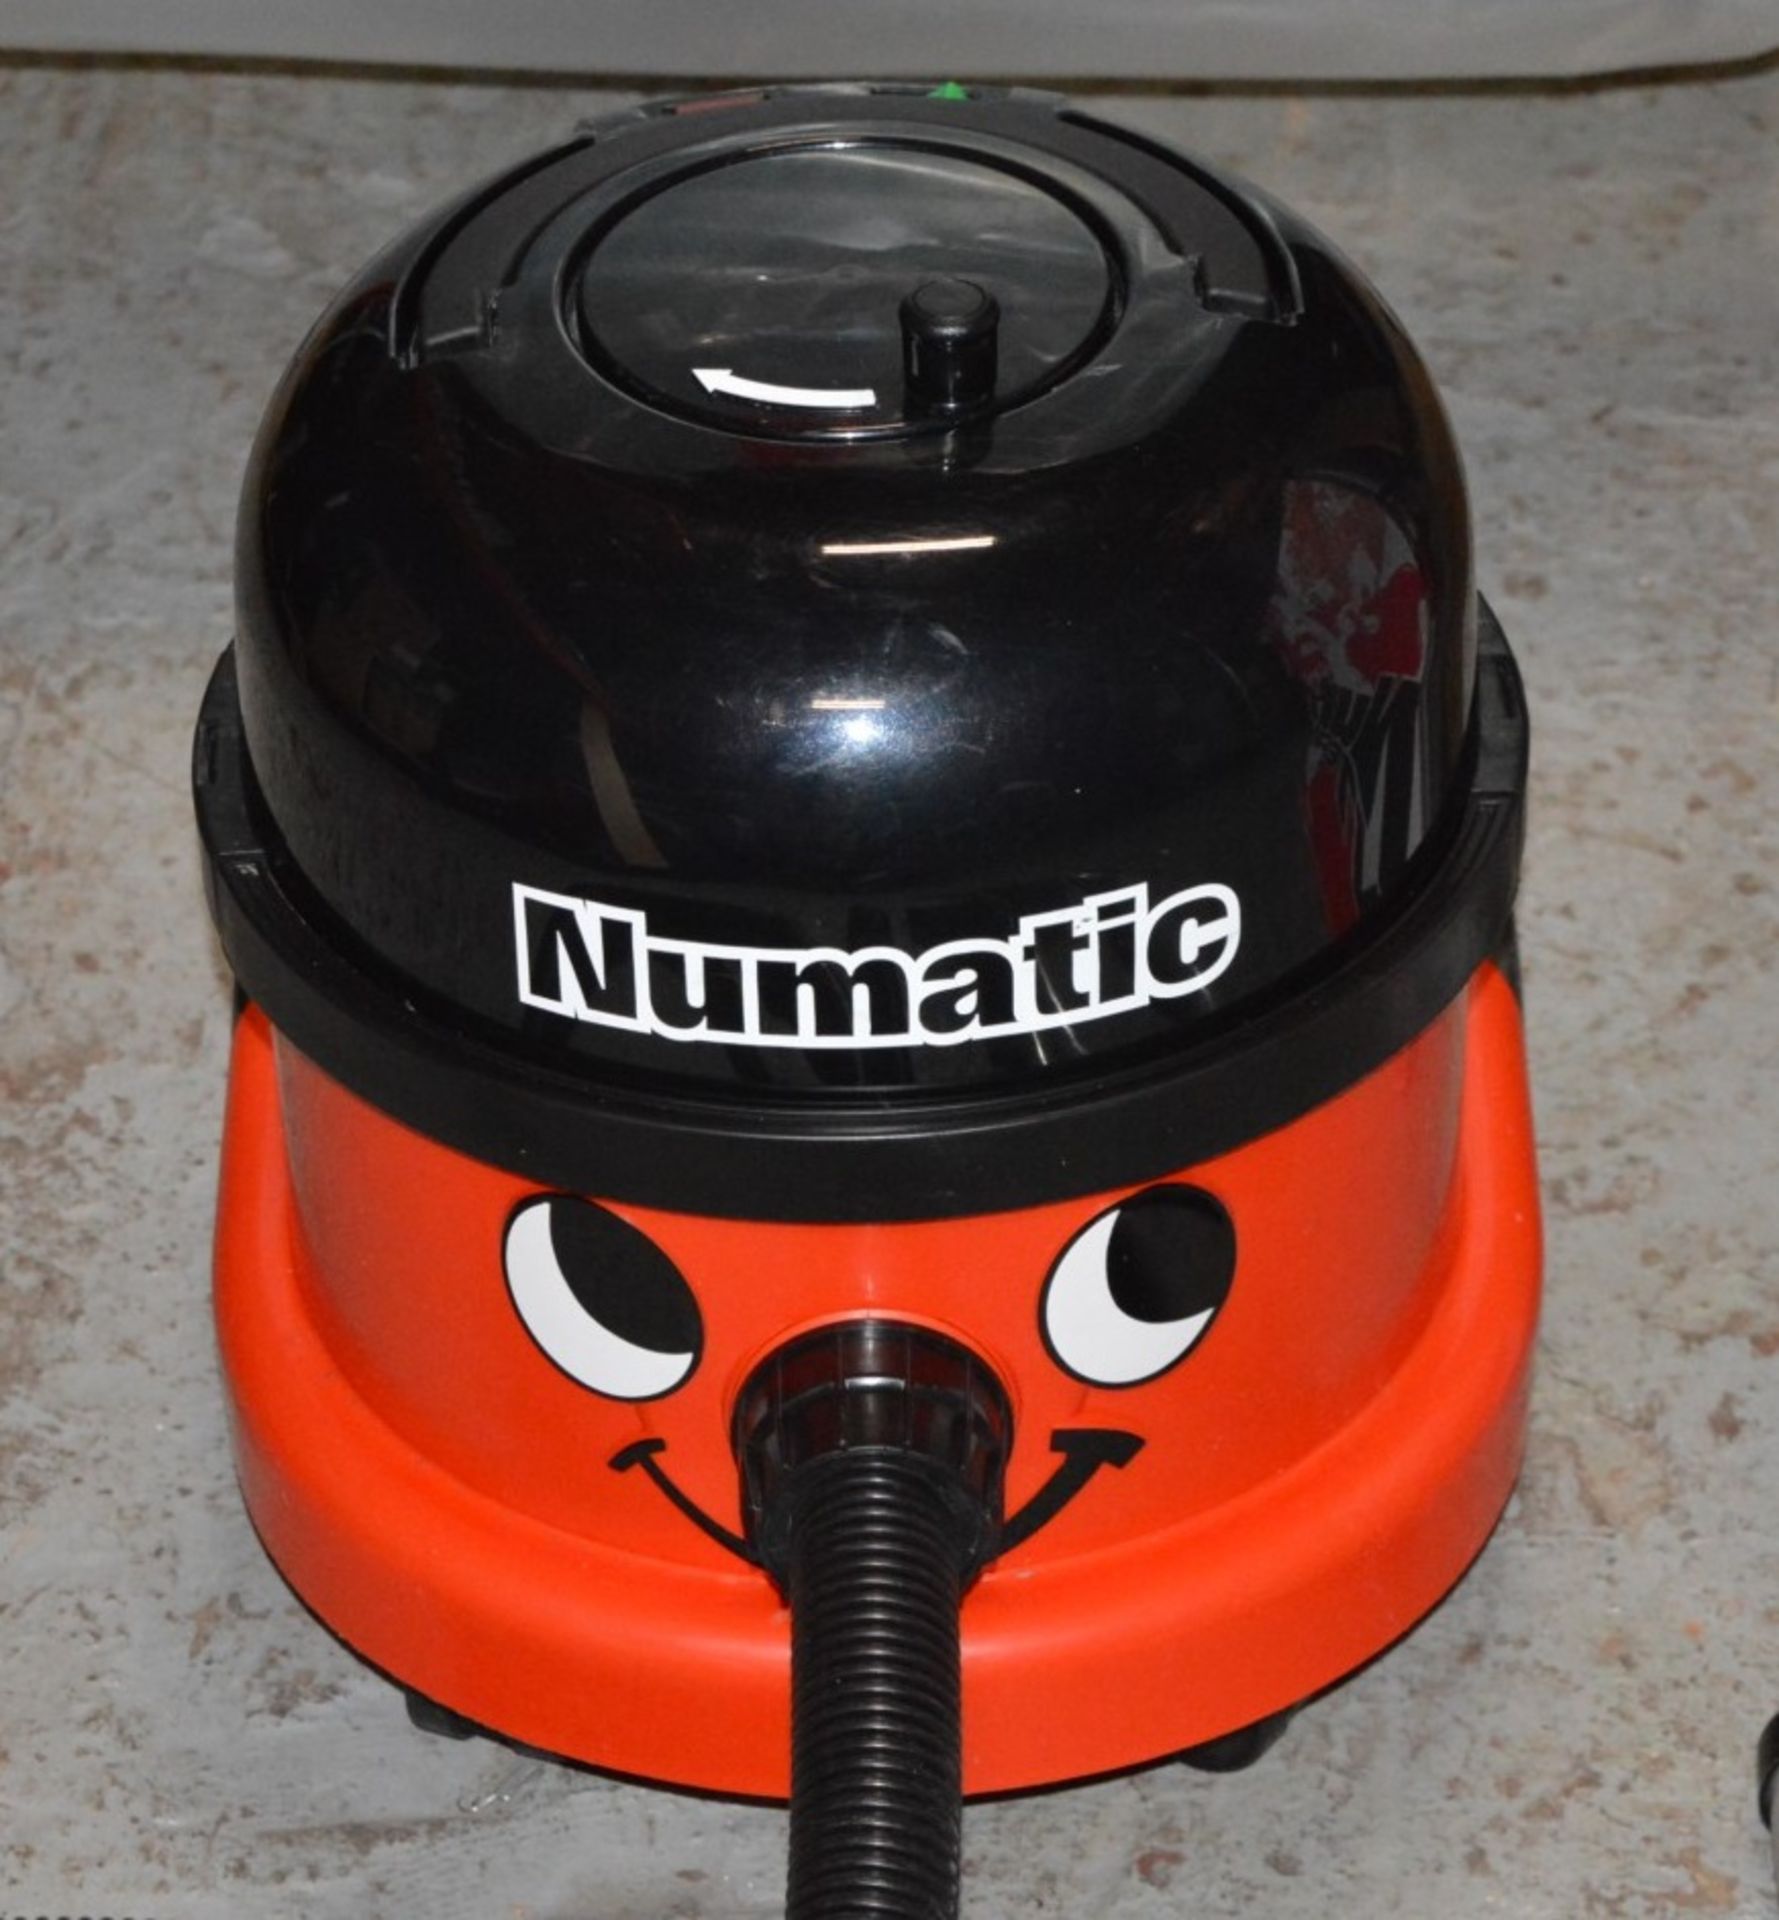 1 x Numatic NRV20021 620W Commercial Vacuum Cleaner - 9 Litre Capacity - CL010 - Good Working - Image 8 of 9